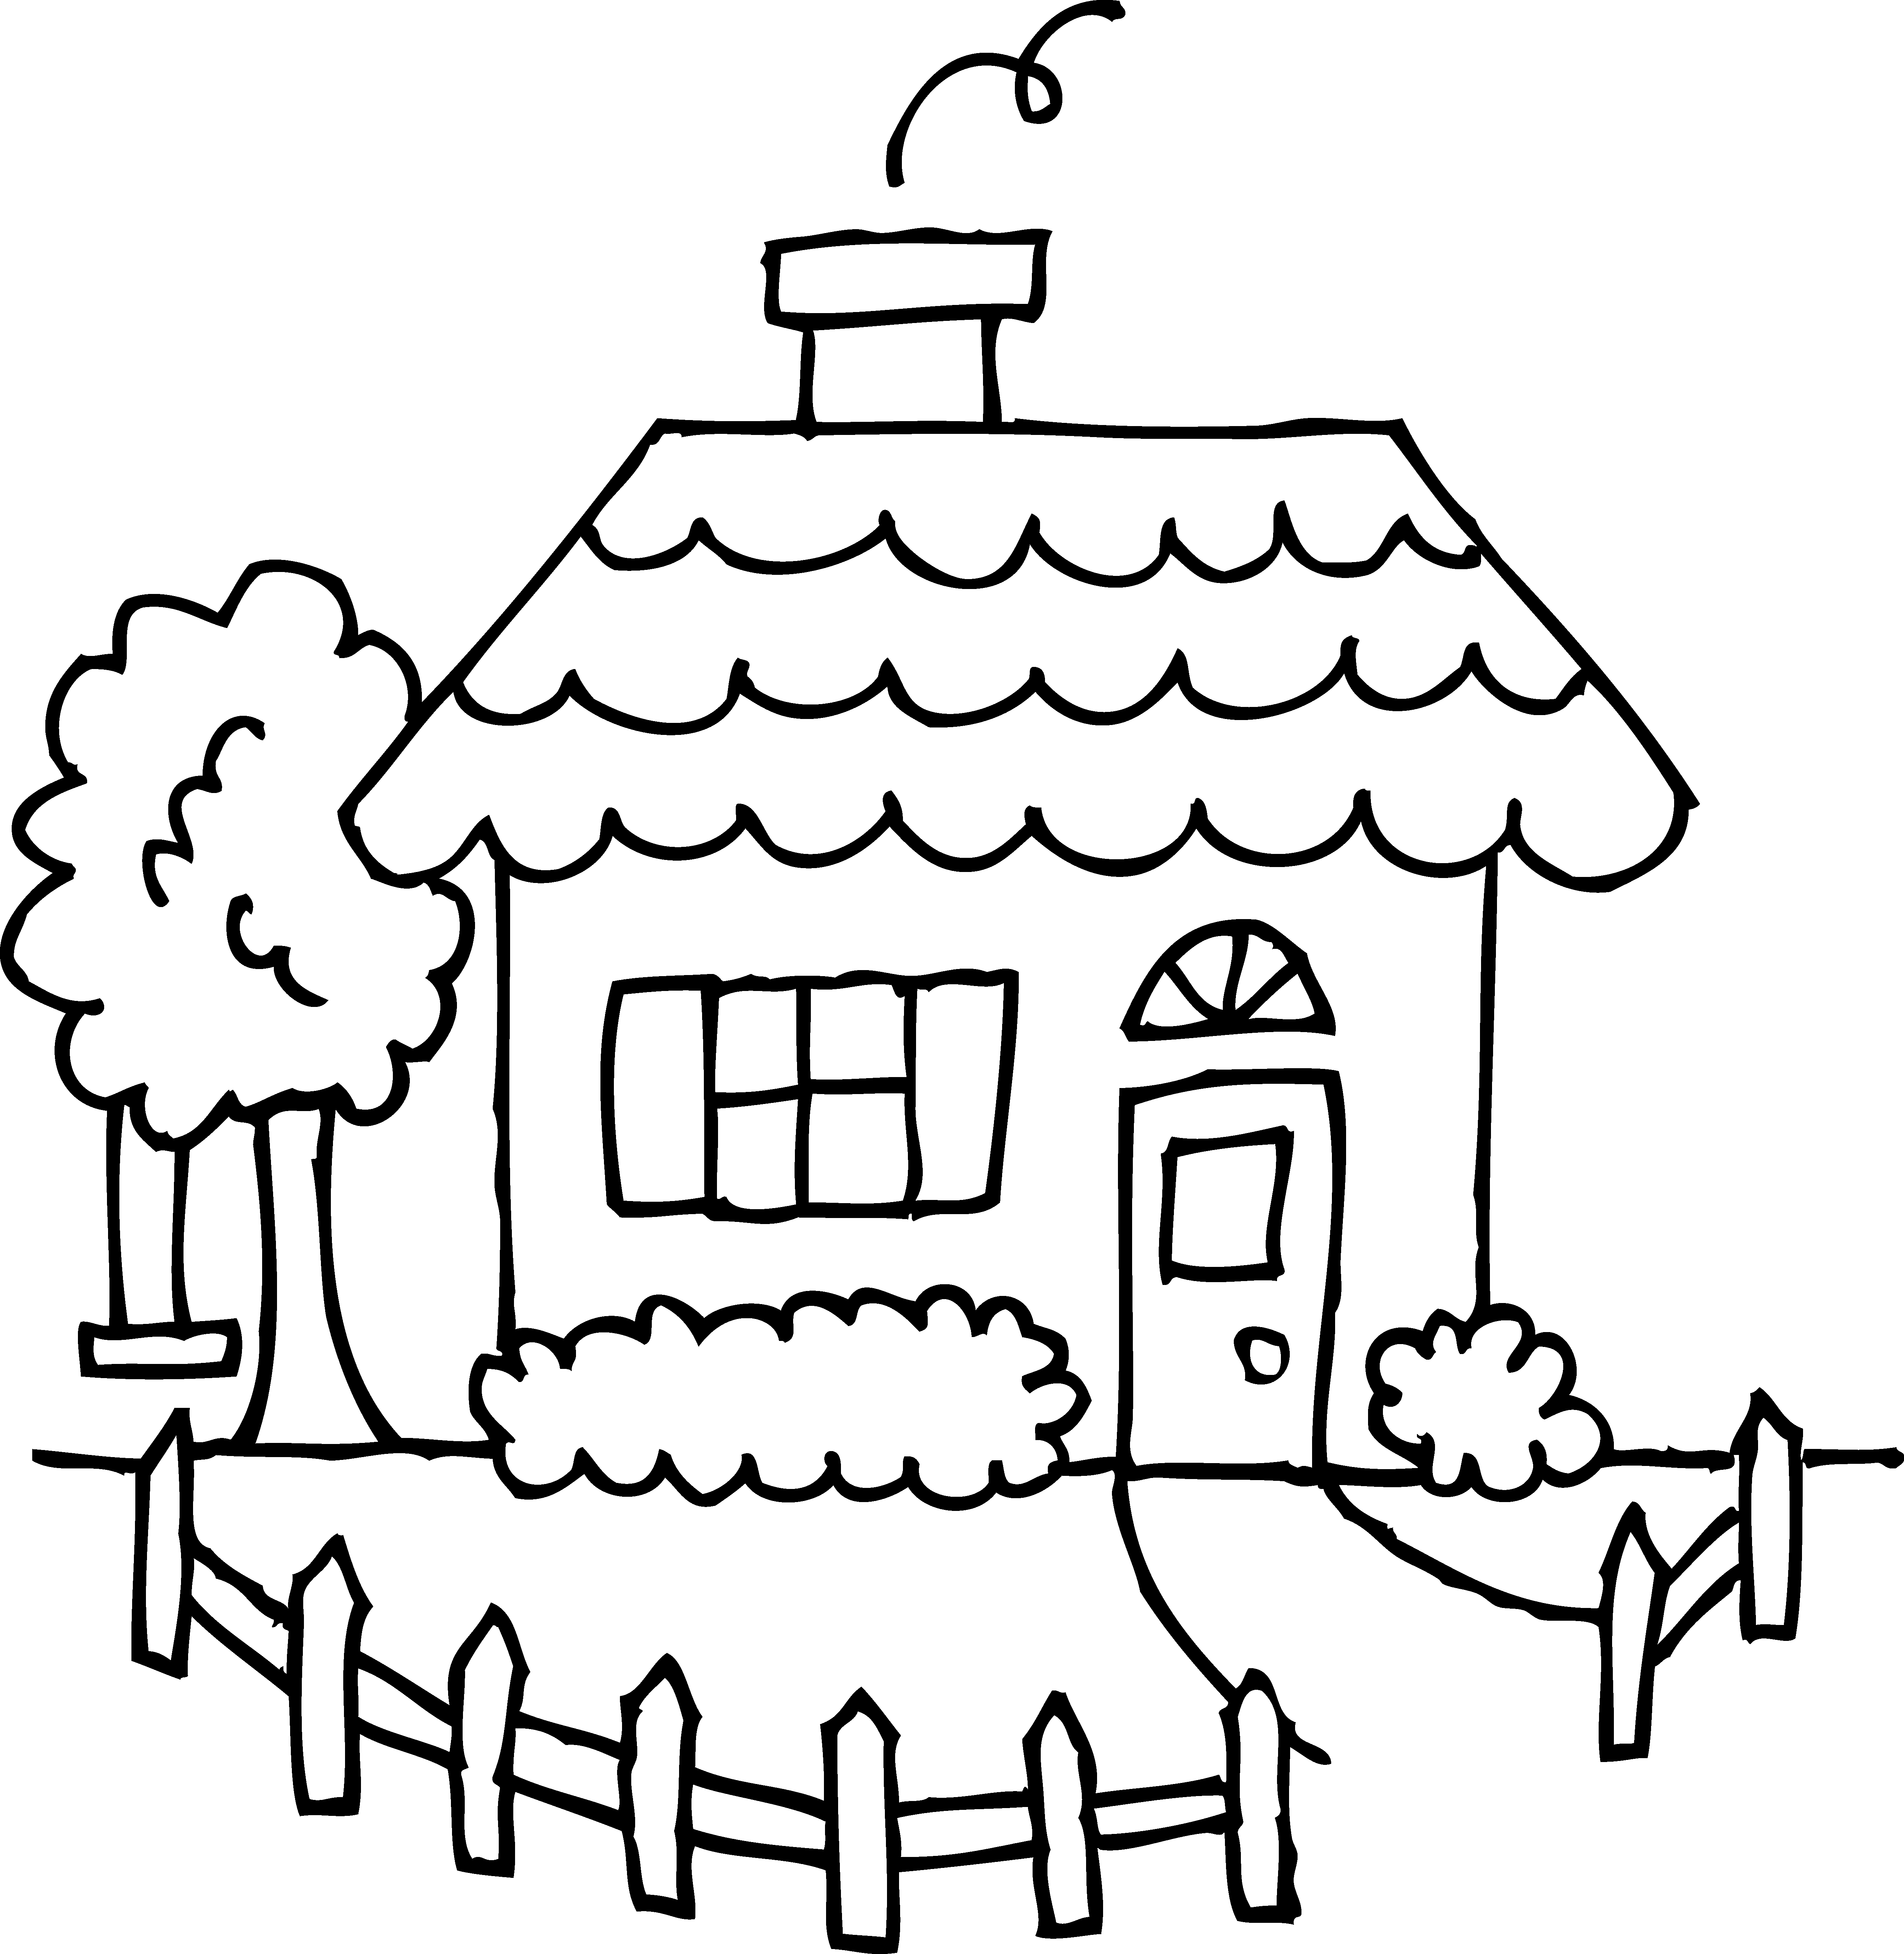 School yard clipart black and white.